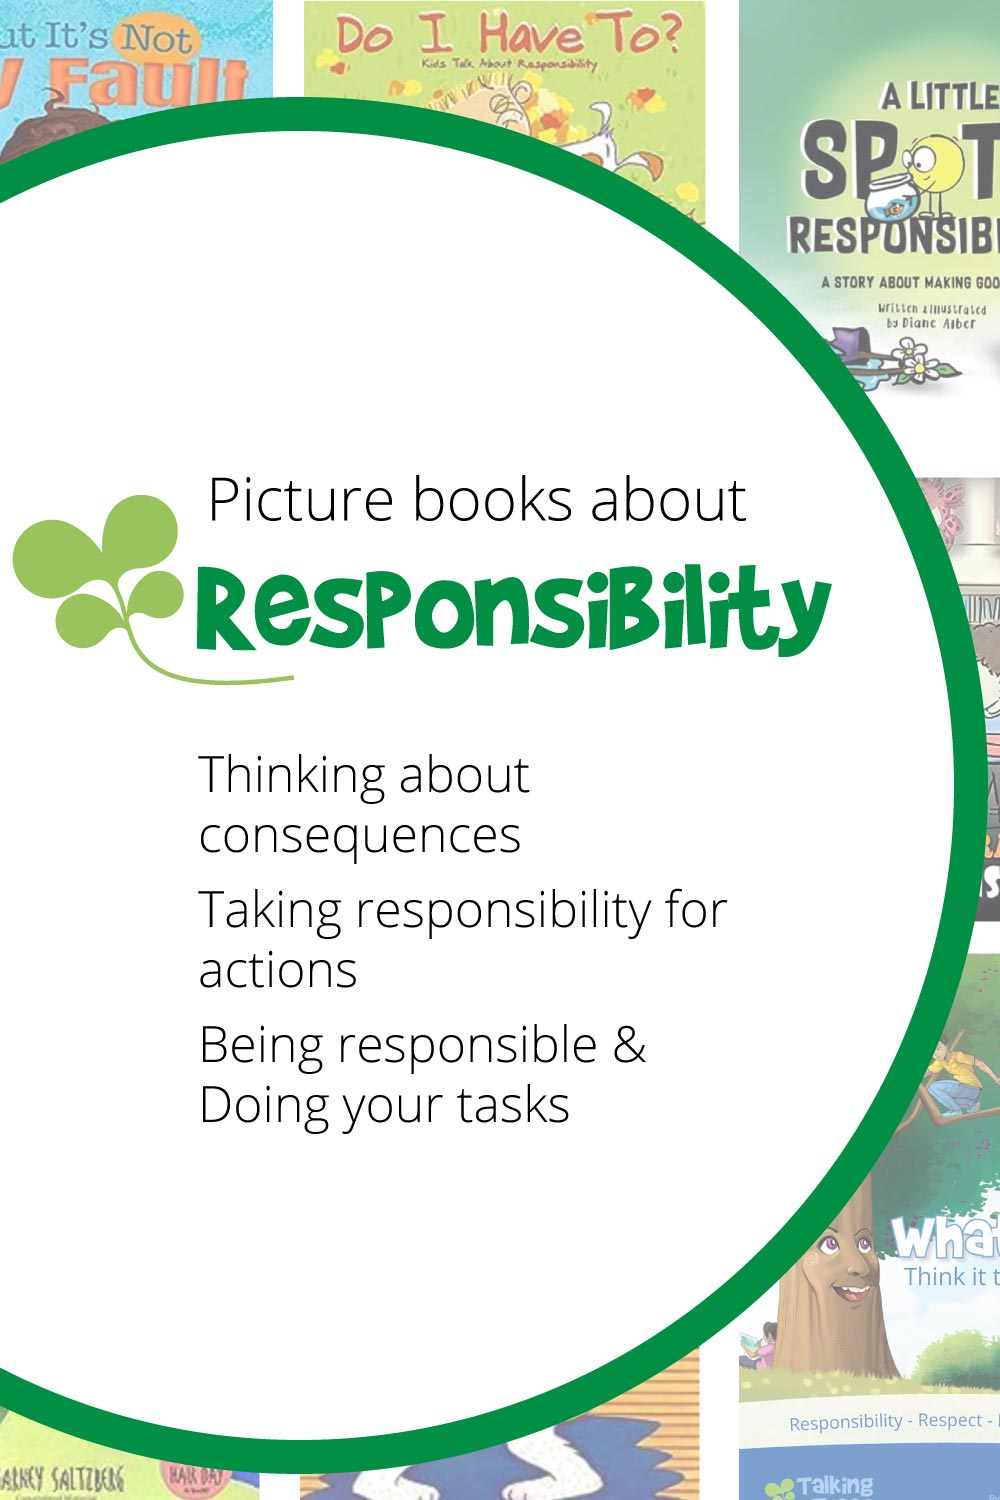 List of the best childrens books about responsibility